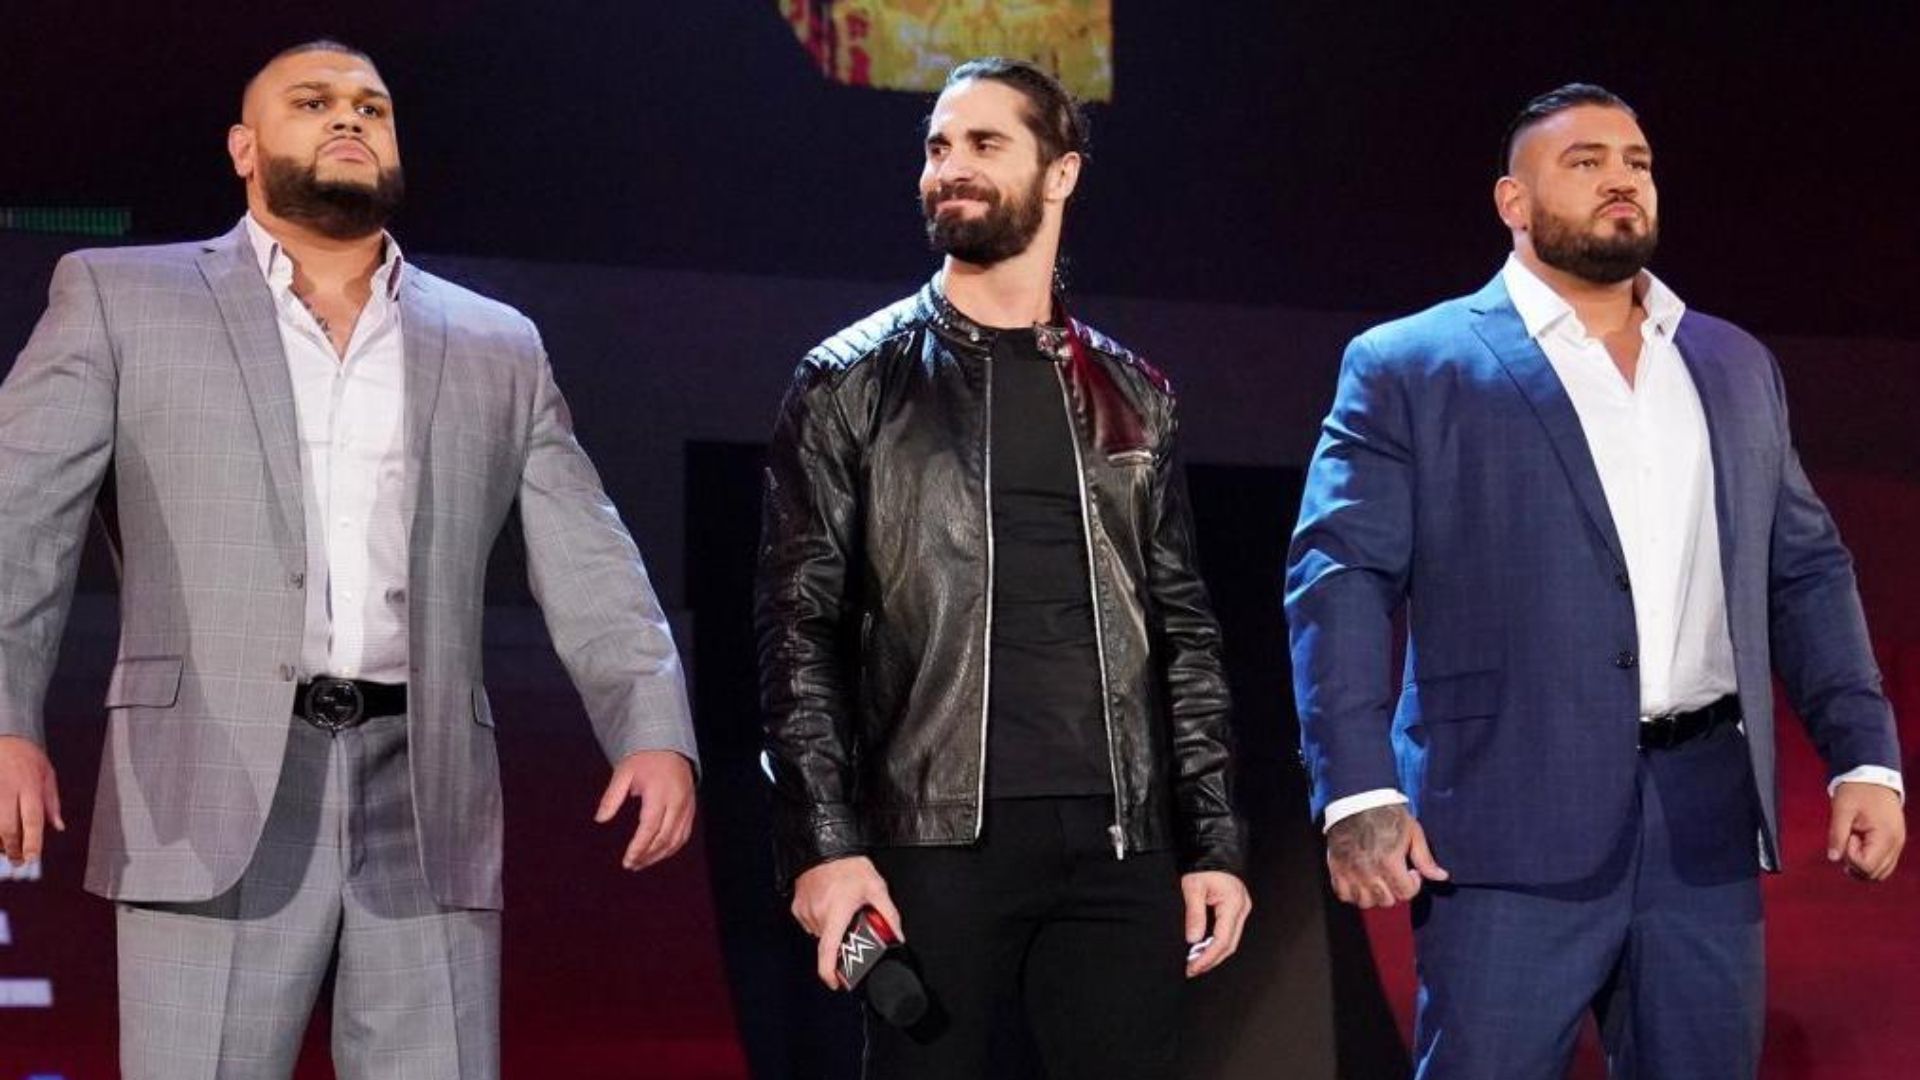 Seth Rollins and the Authors of Pain during the pandemic on WWE TV